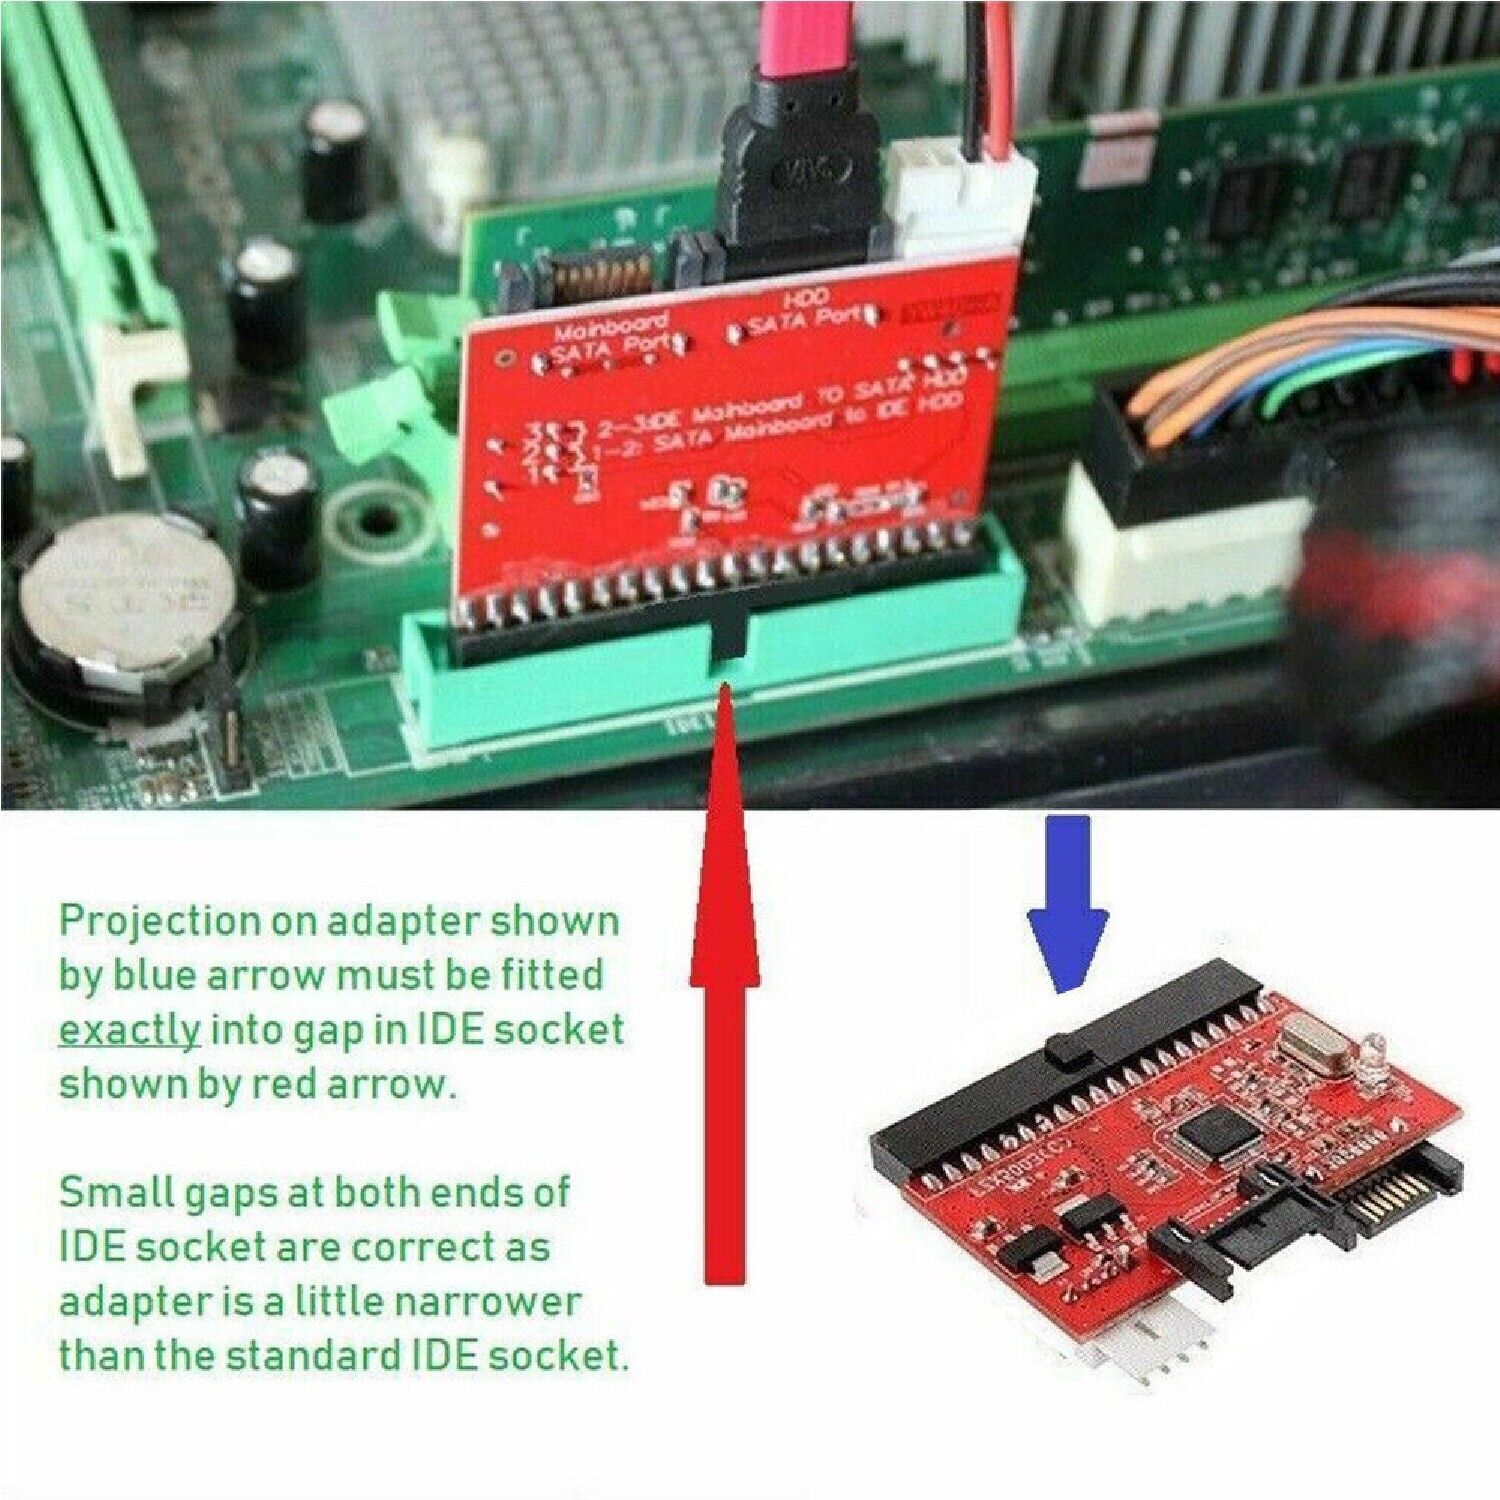 Bidirectional IDE to SATA HDD Adapter Converter Serial-ATA 40pin port with Cable